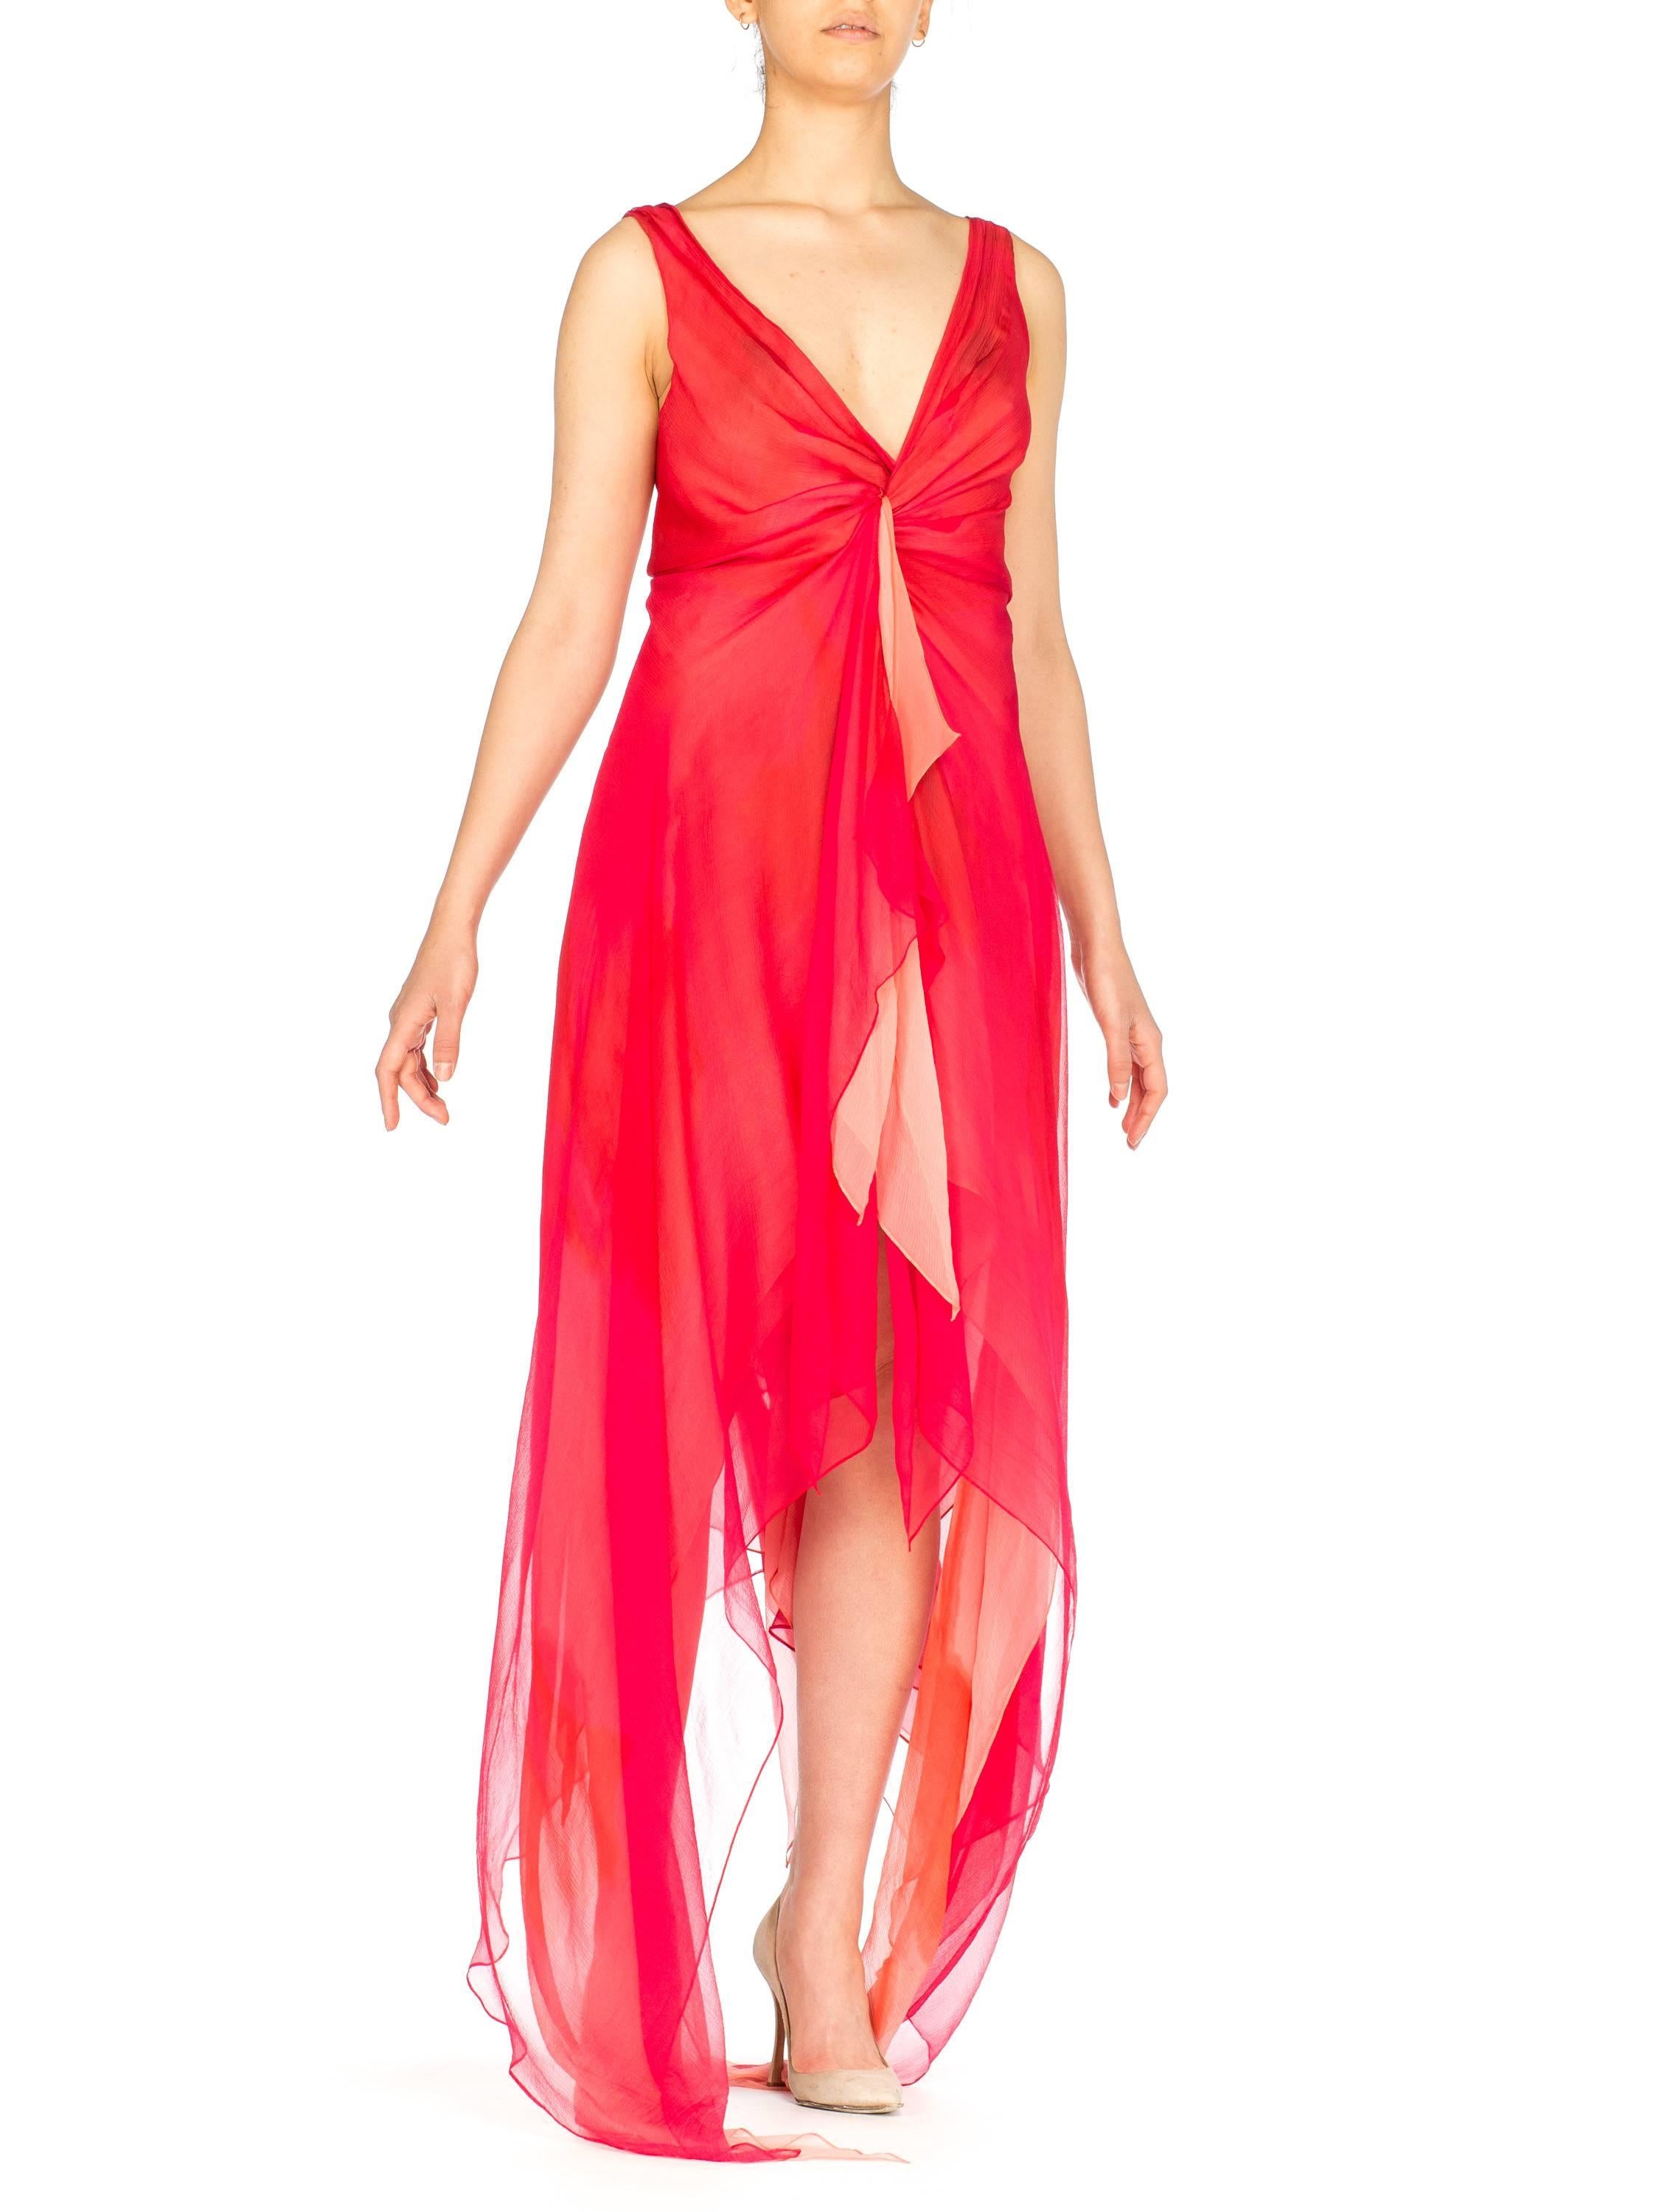 Donna Karan Layers of Red and Pink Chiffon Gown, 1990s  4